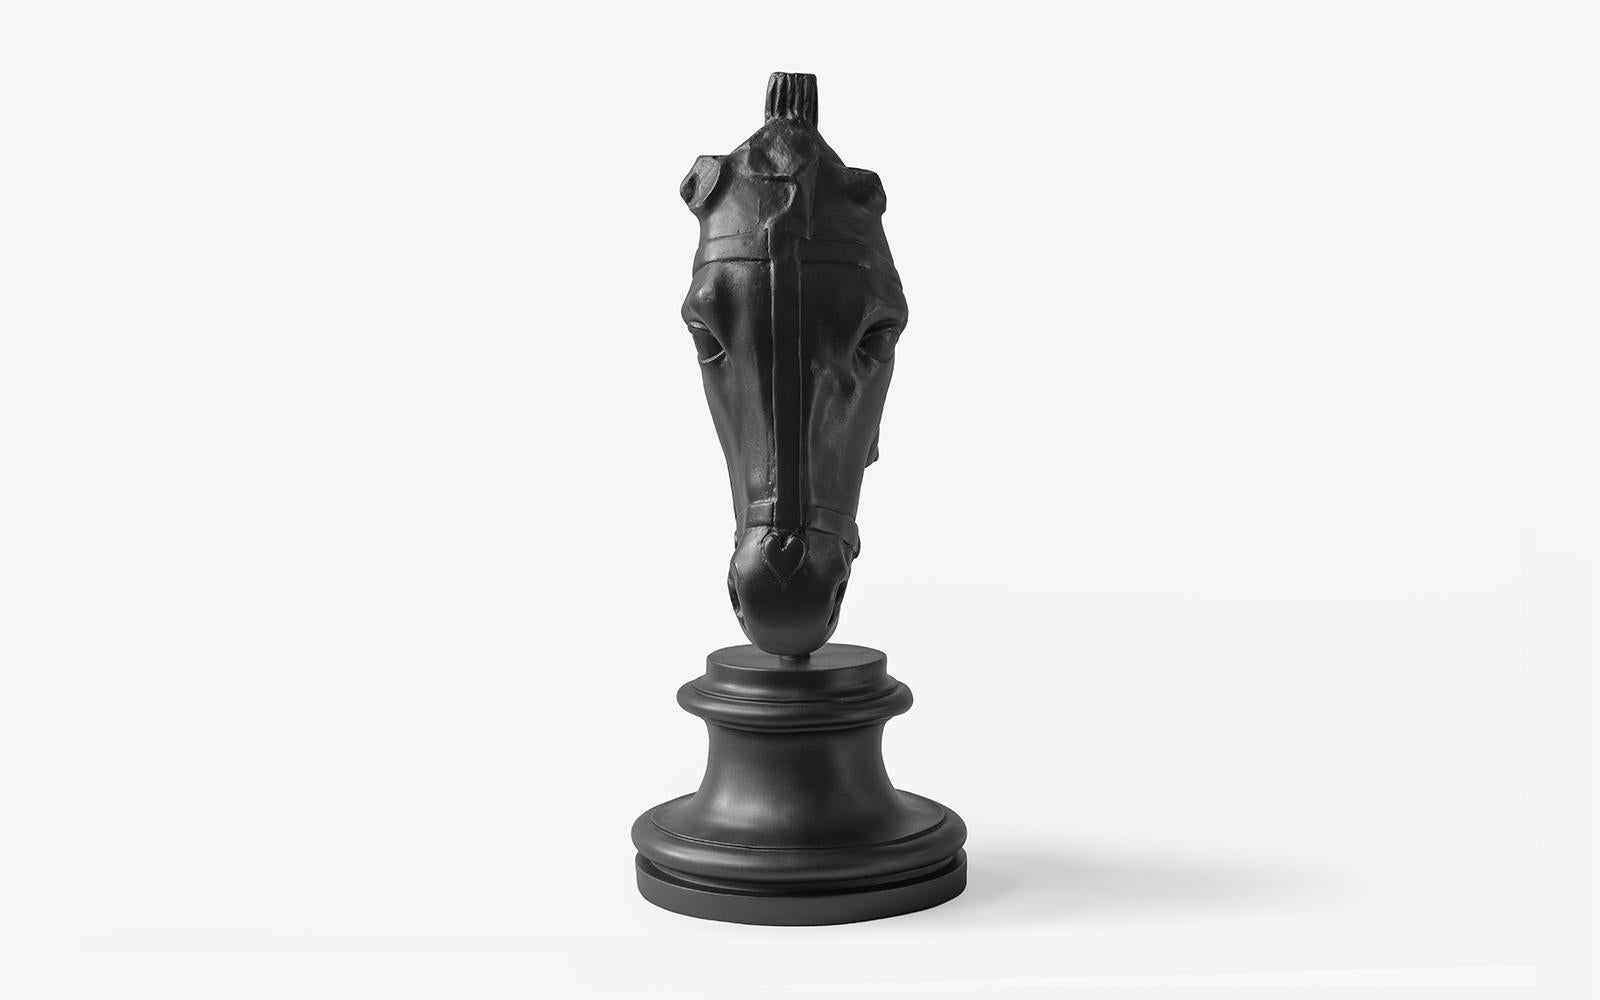 -Black painted
-Produced from pressed marble powder.
-Produced from the original molds of the works from the museum.
-The original is displayed in the Istanbul Museum.